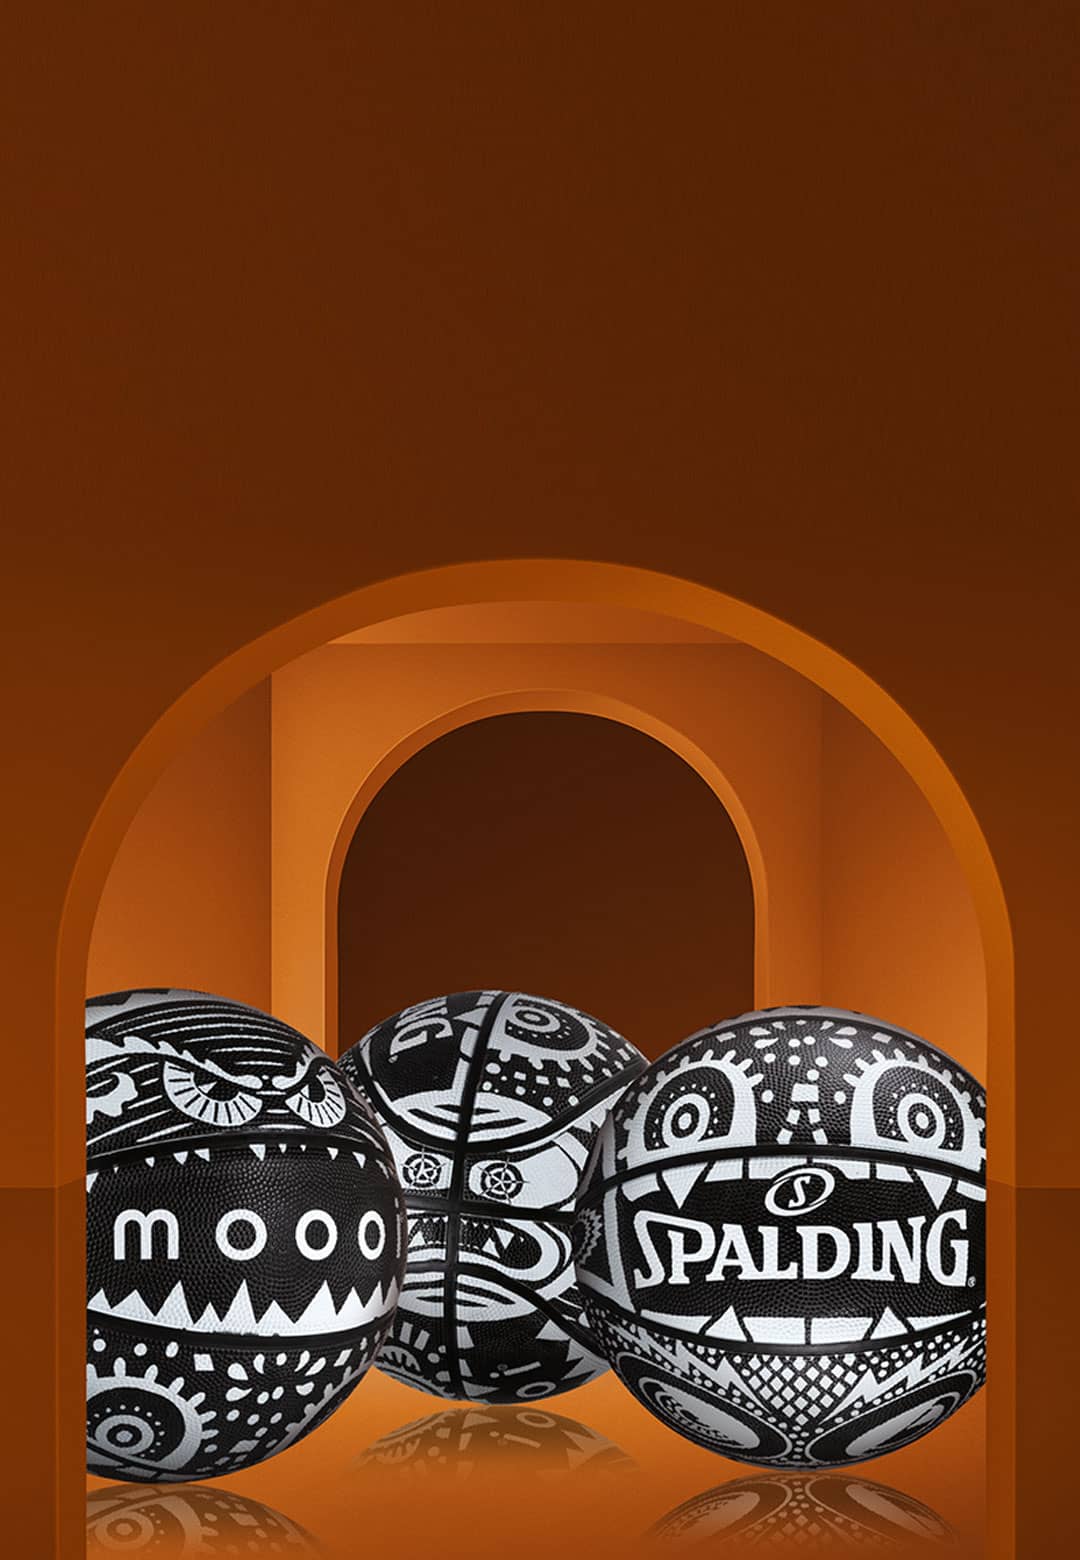 Moooi X Spalding create special edition Monster Basketball